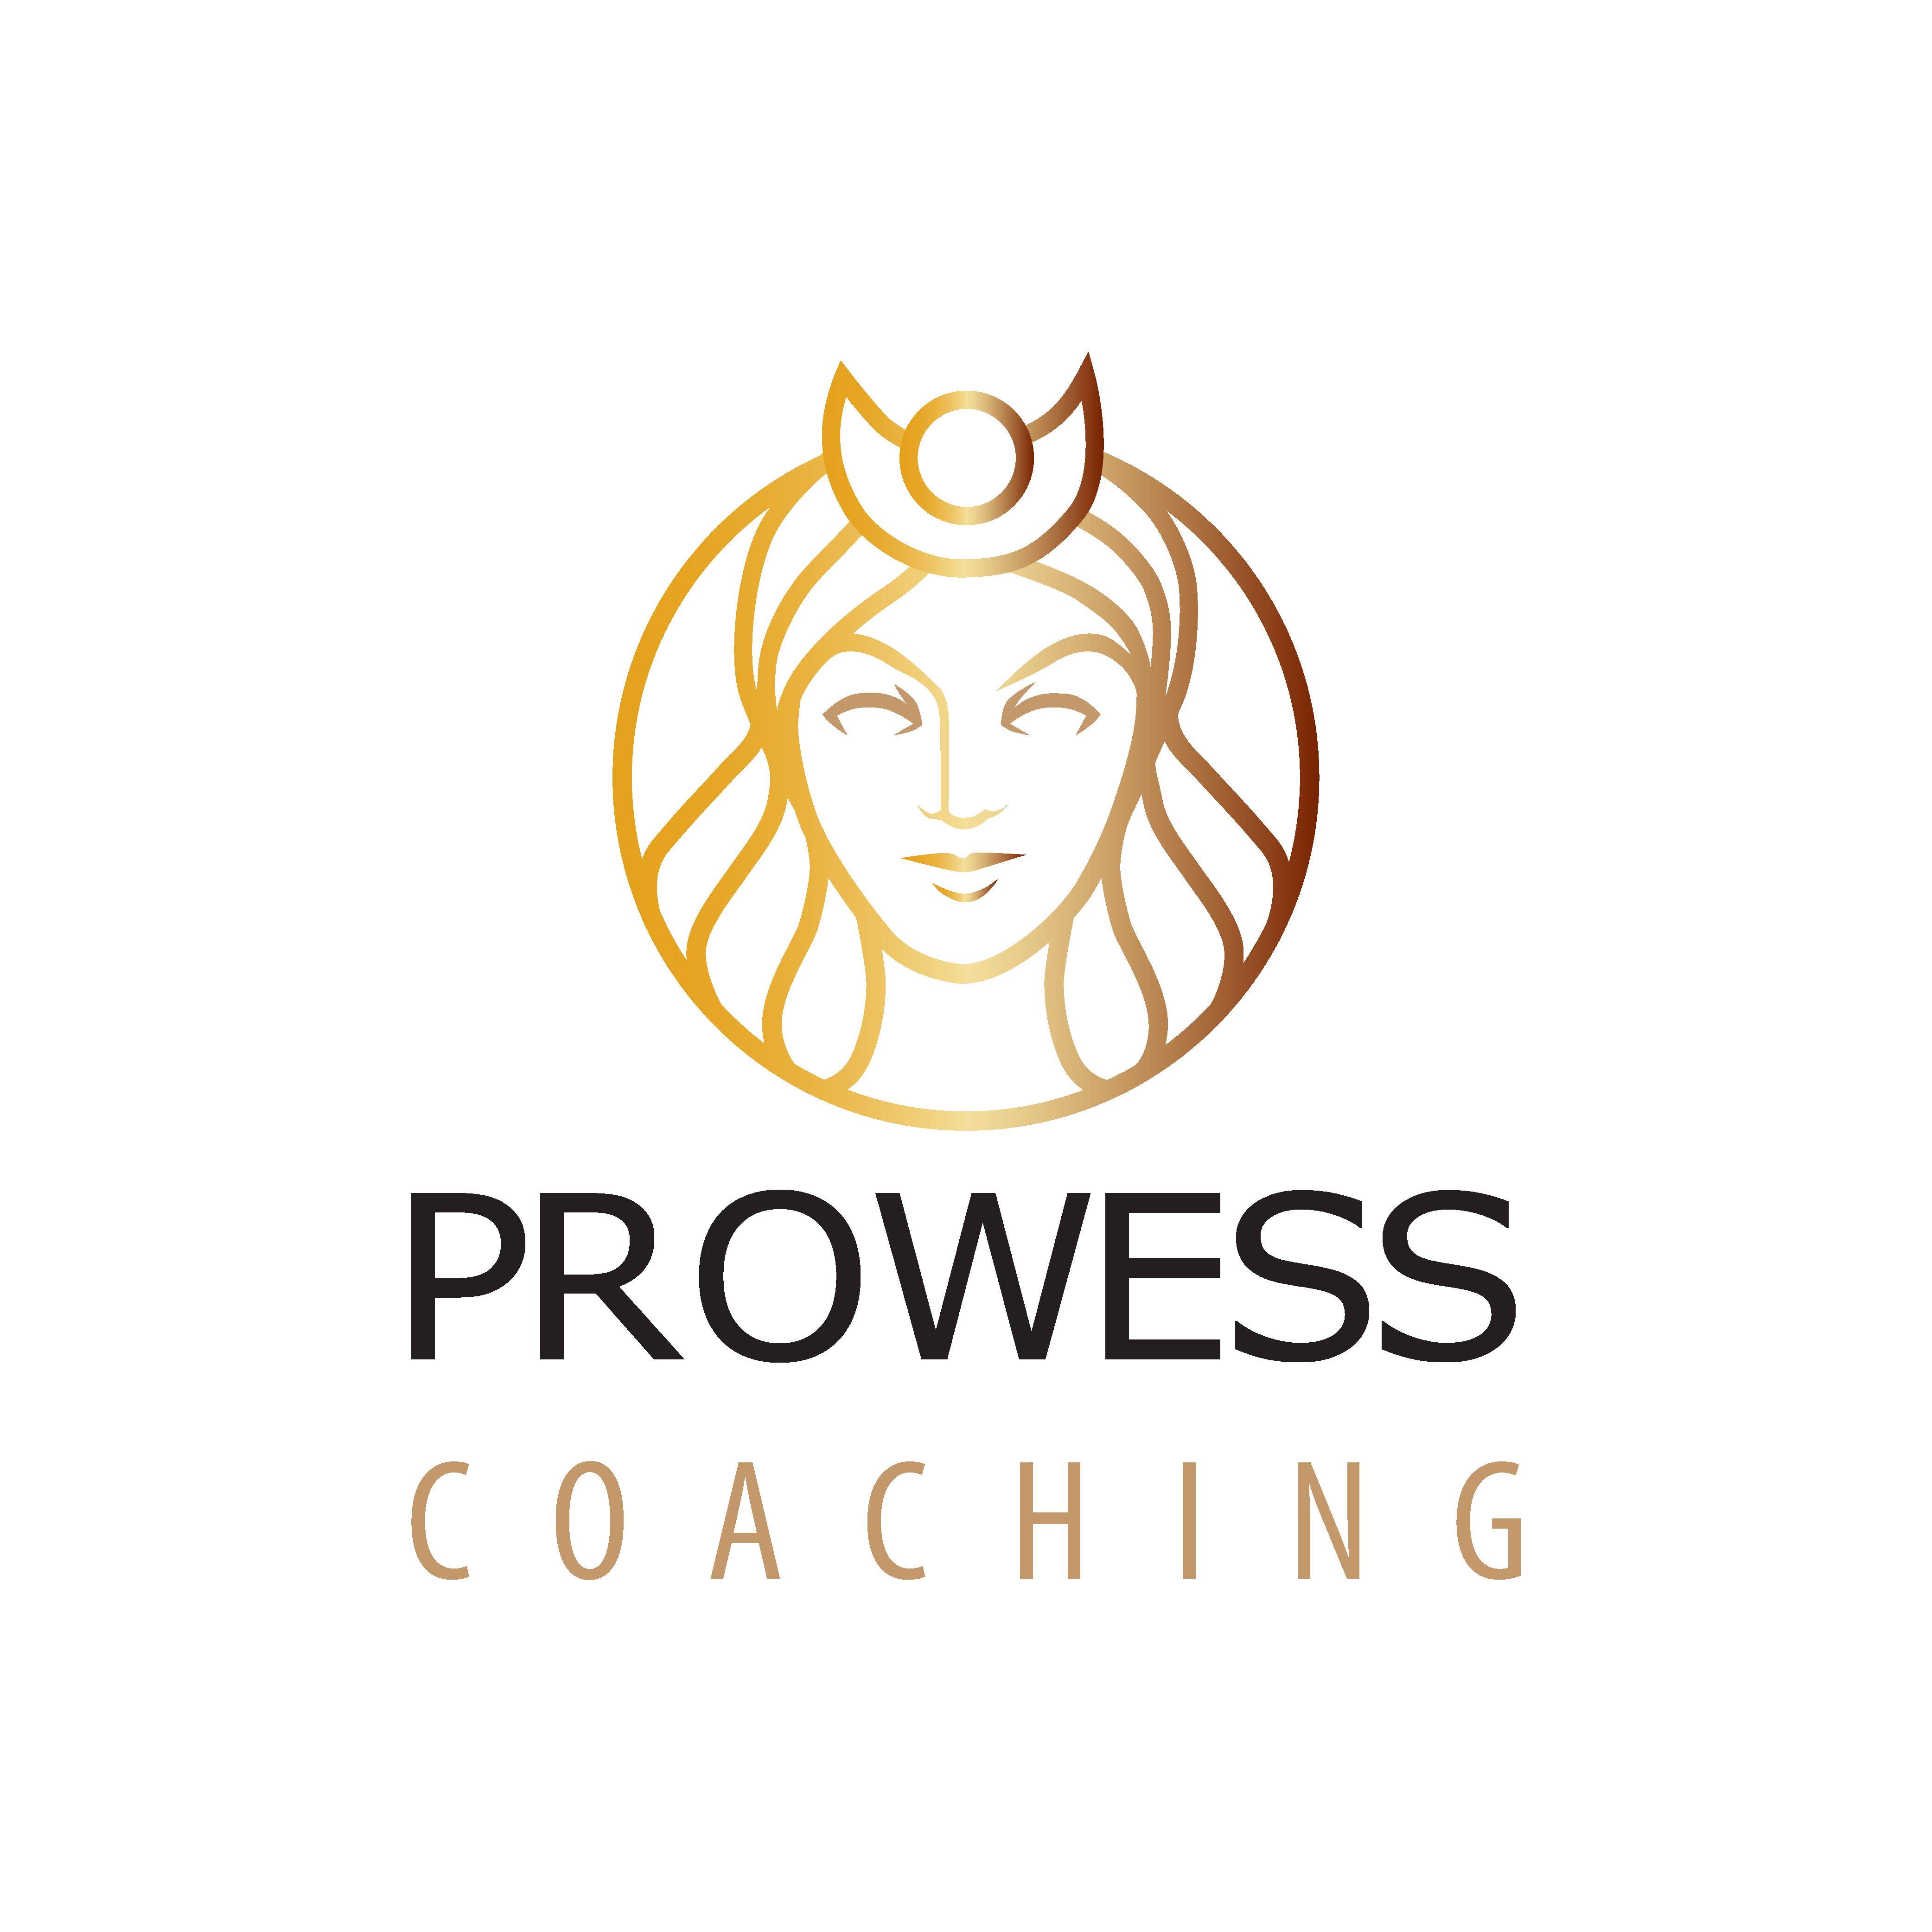 Prowess Coaching